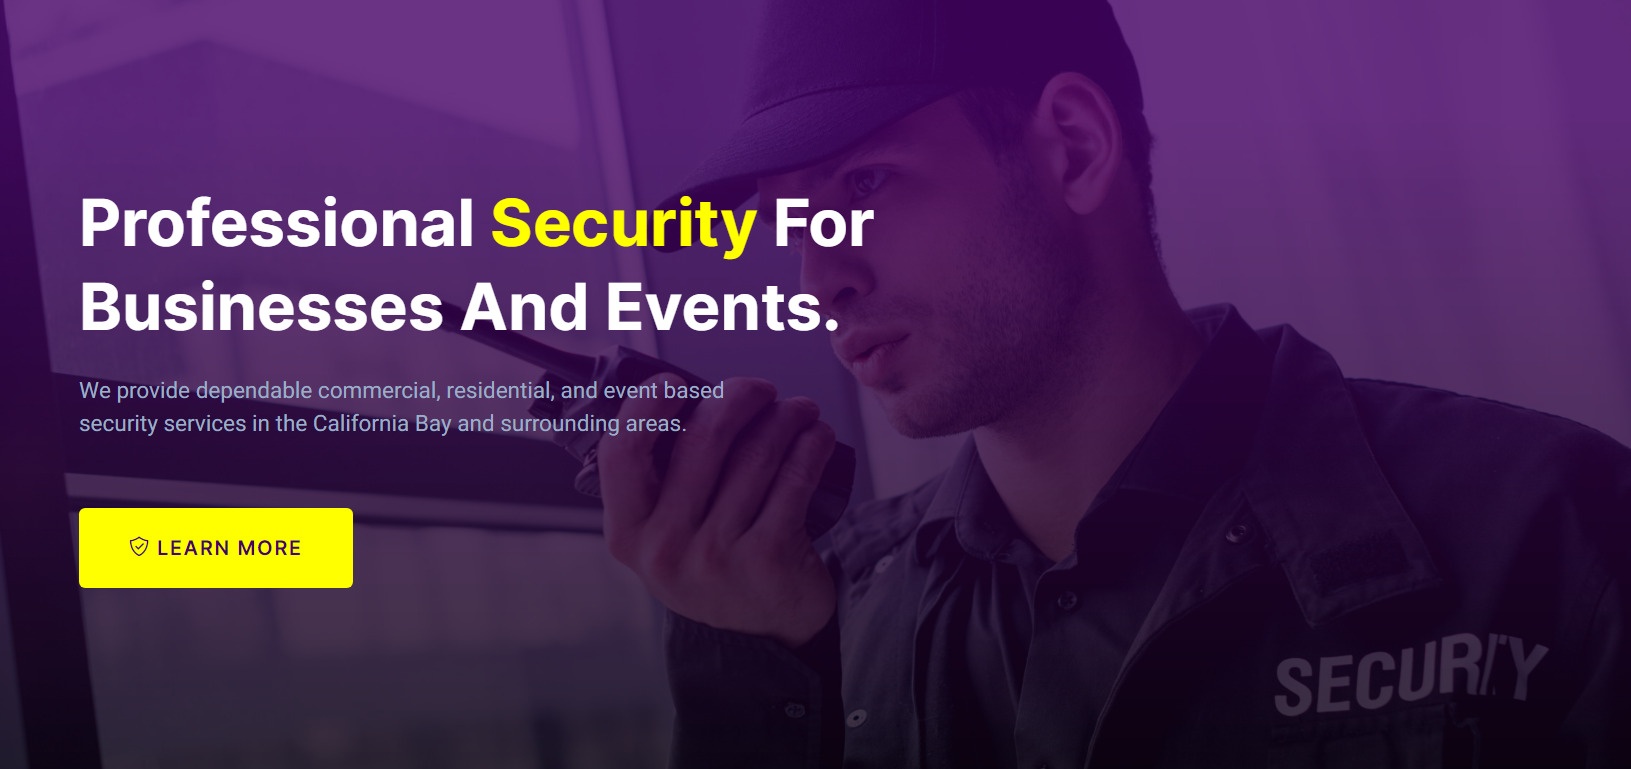 Five Star Security & Event Staffing - Sacramento CA on CitySpotz | Providing dependable commercial security, residential security, private security, and event based security services in the California Bay and surrounding areas.